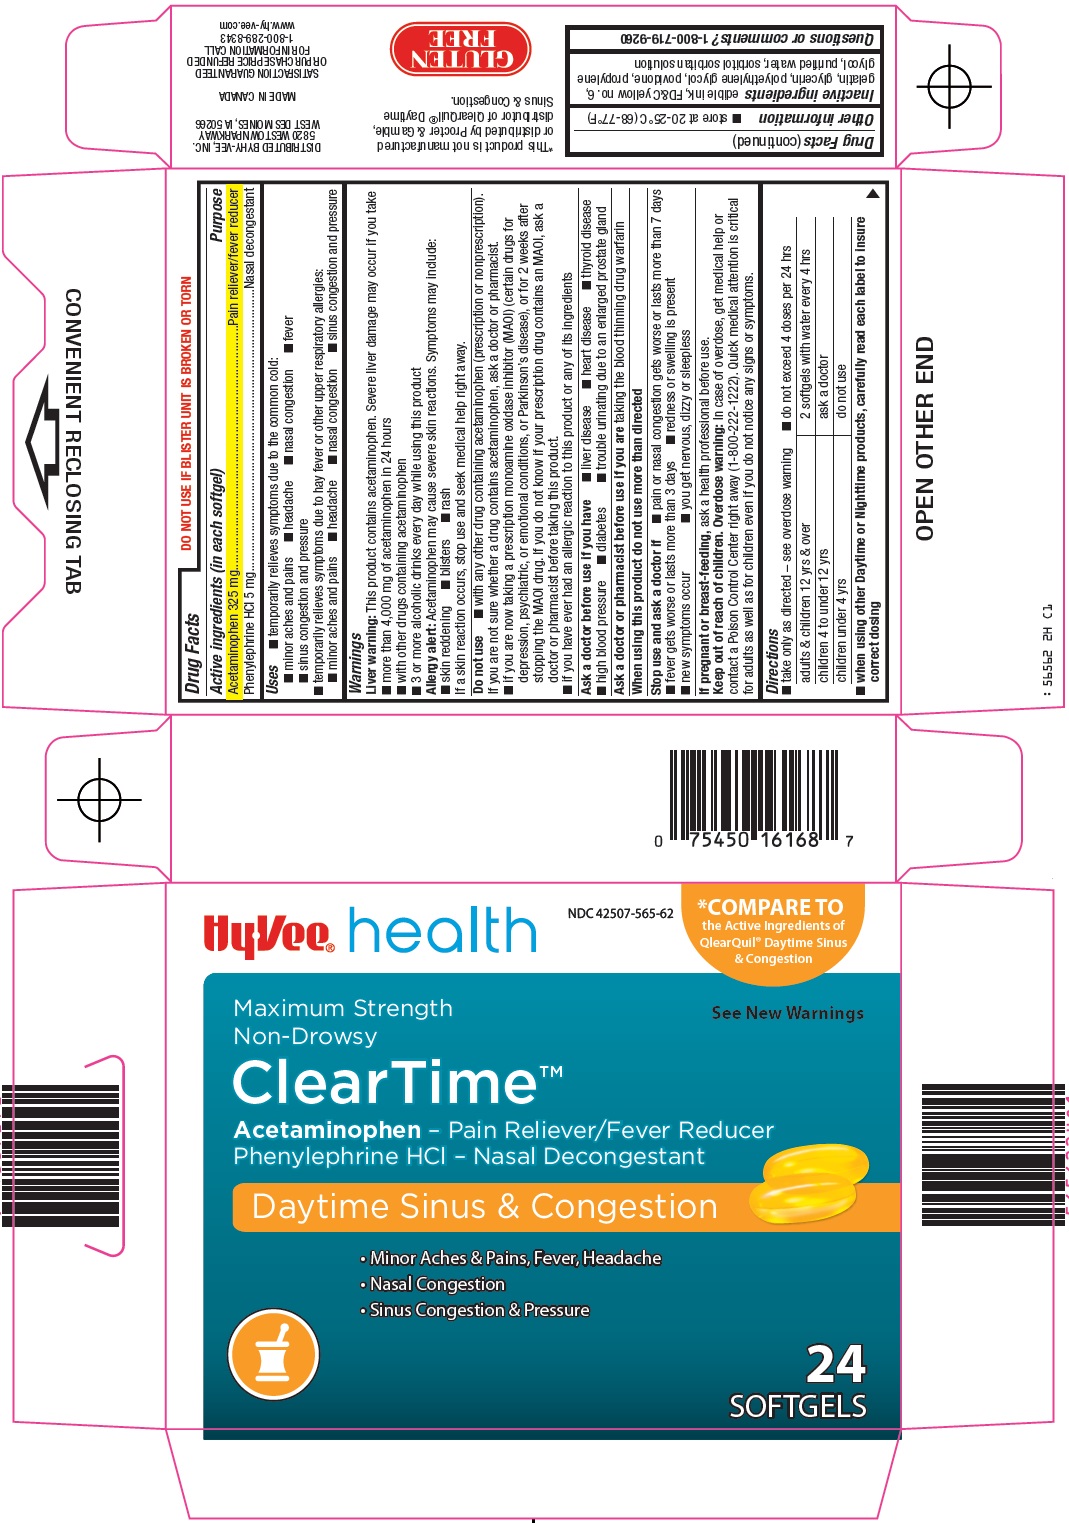 Hy-Vee, Inc. ClearTime Carton